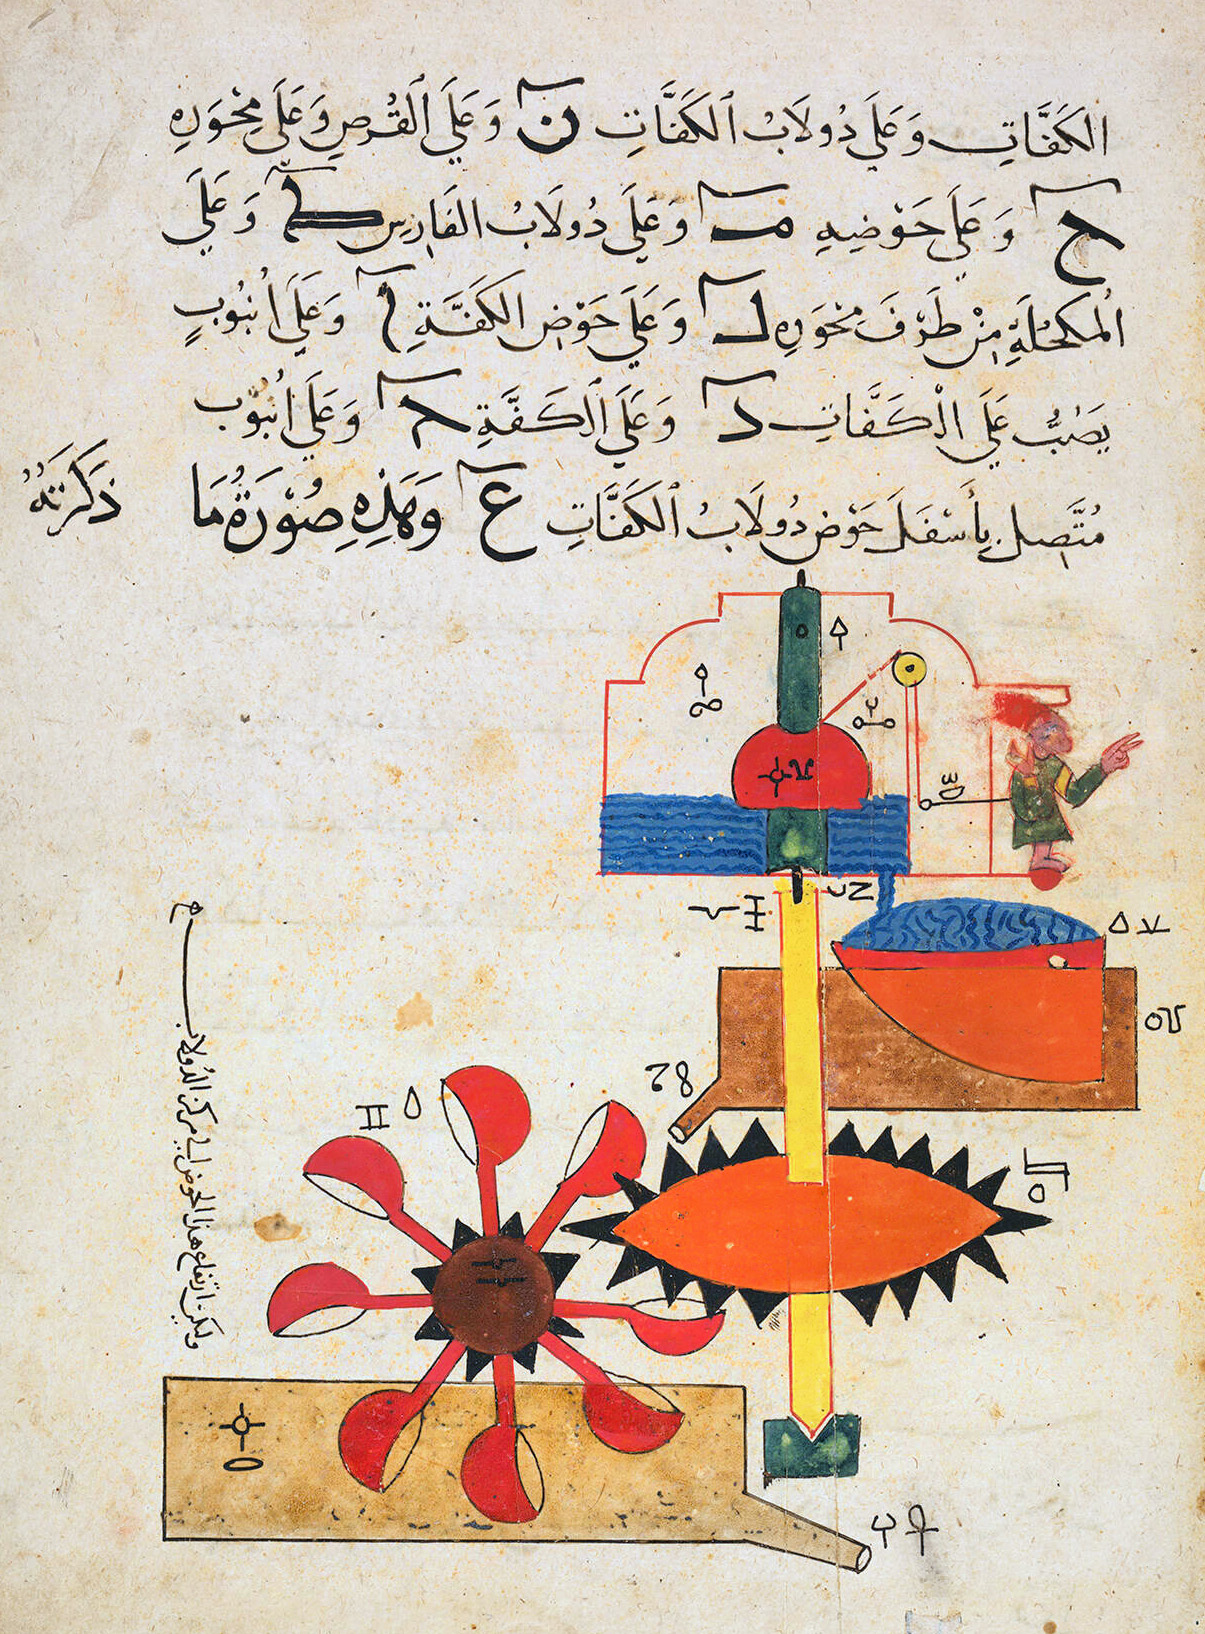 An image of an old manuscript page with Arabic text and colorful illustrations.The illustrations are geometric and show a diagram of a hydraulic device, with bright colors like red, blue, green, and yellow.